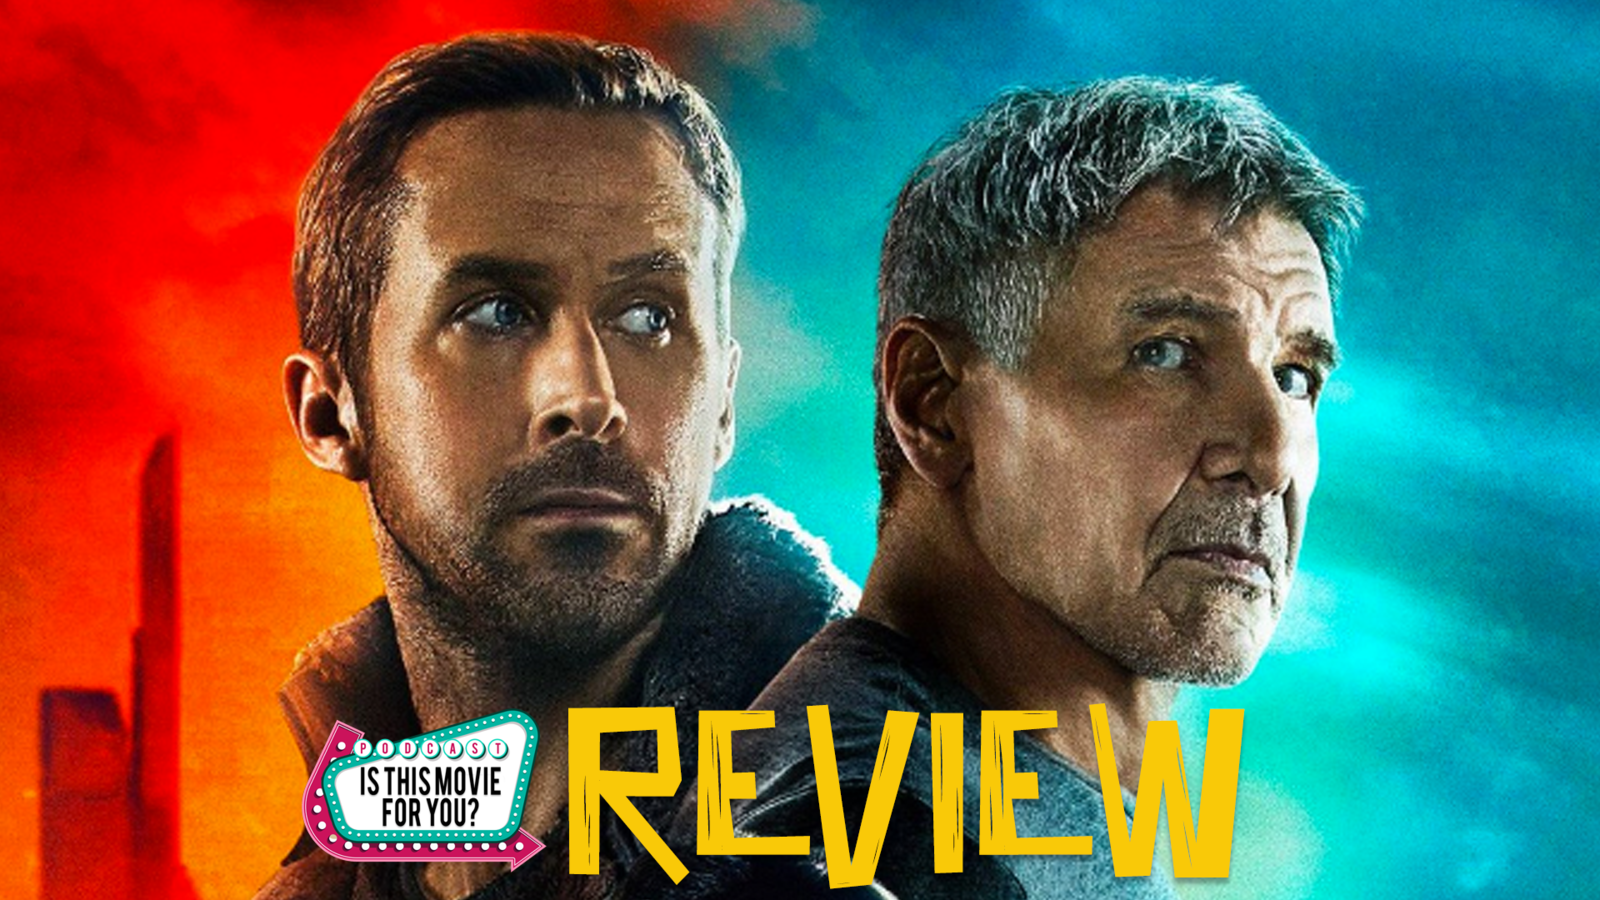 ep16 - Is 'Bladerunner 2049' the movie for you?